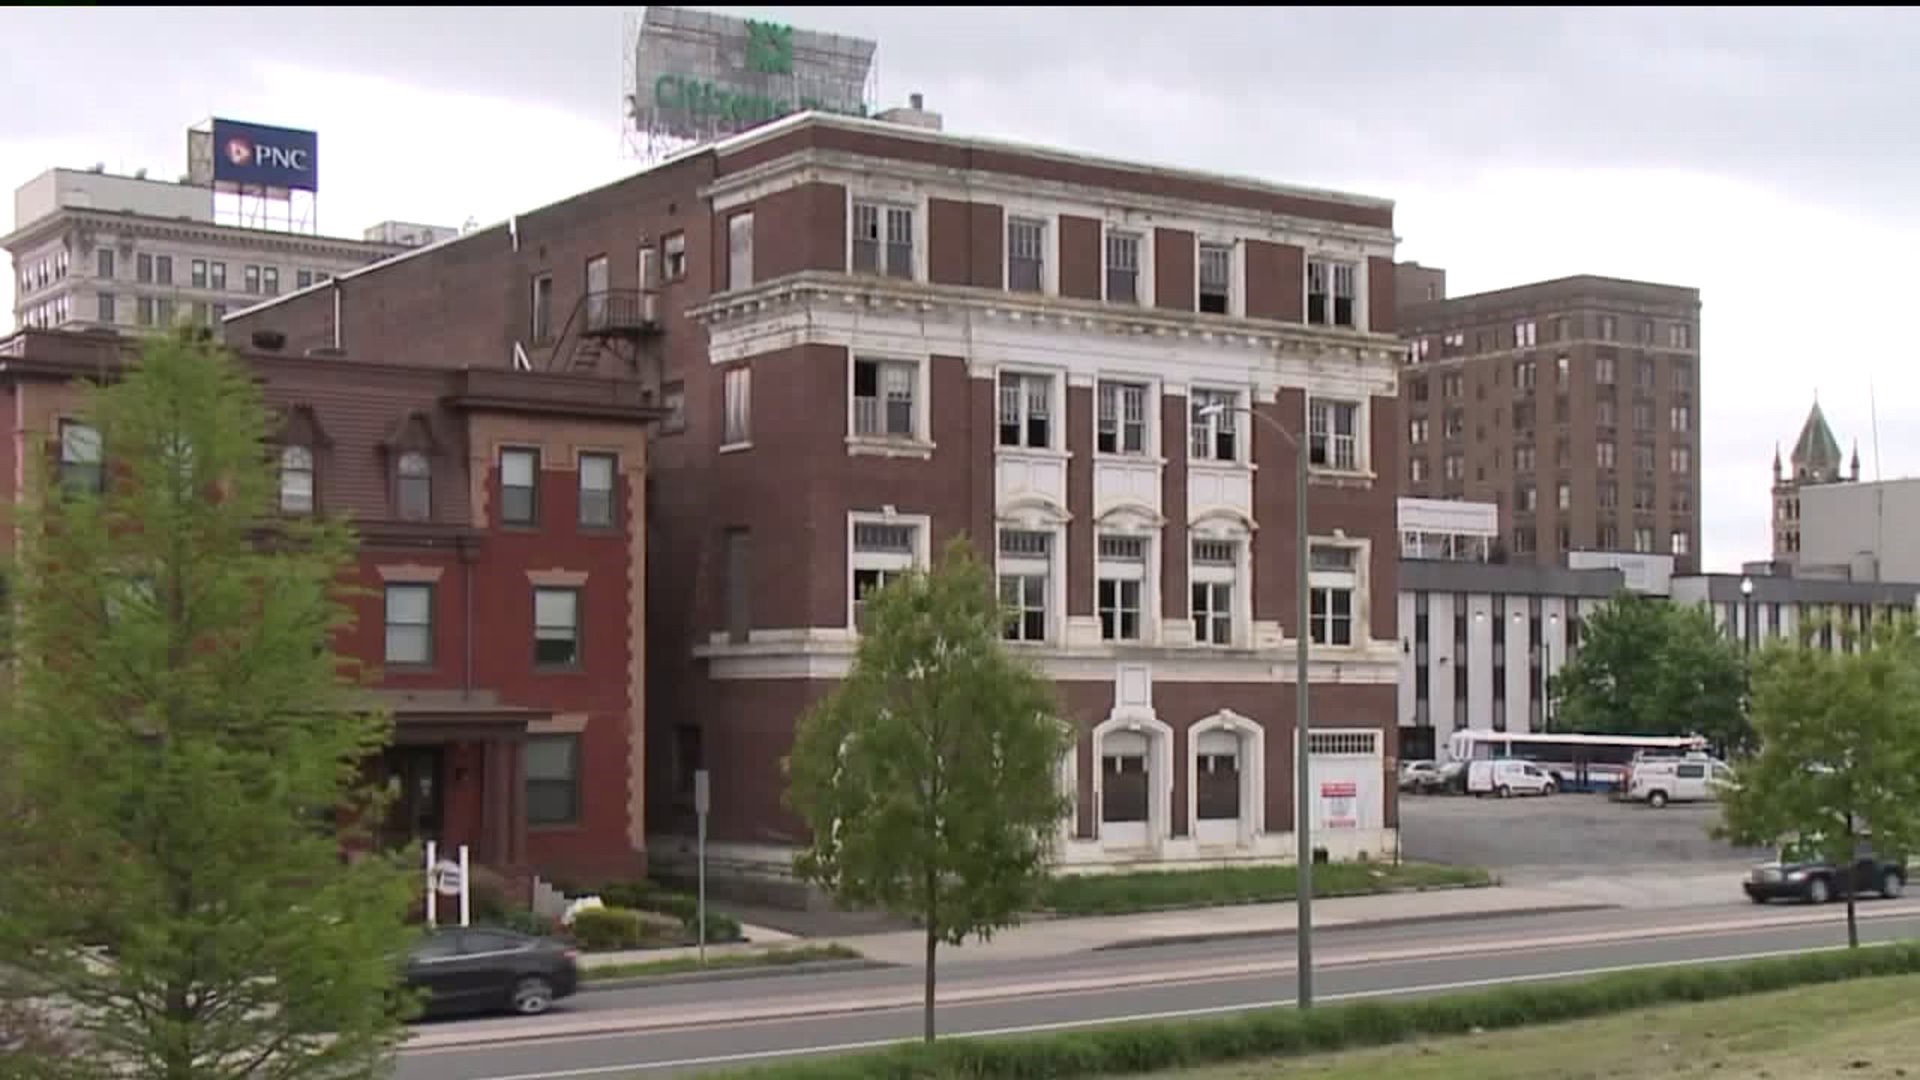 Hotel Sterling Annex to Become Apartments